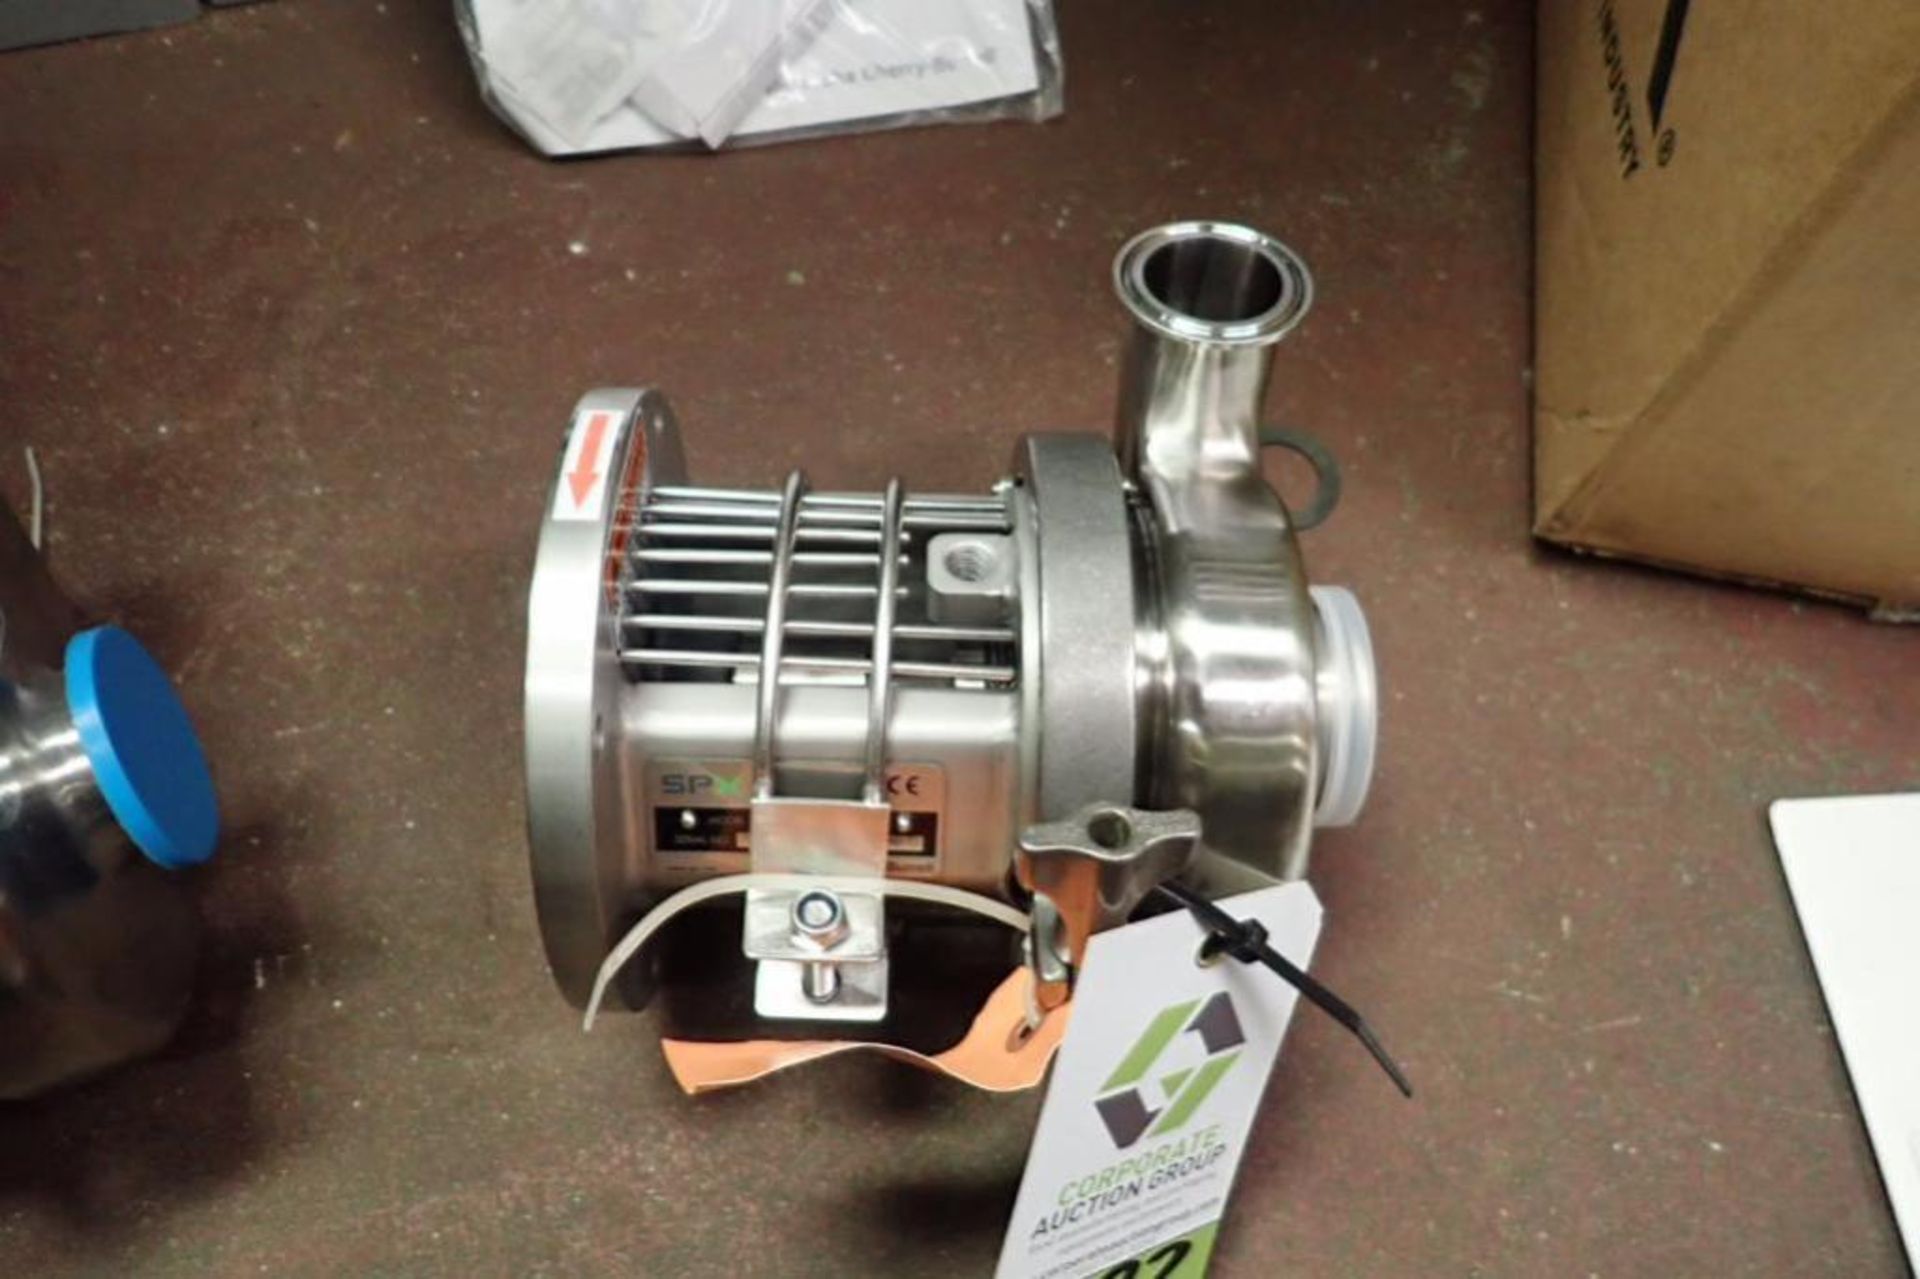 SPX SS centrifugal pump head, Model C114, 1.5 in. x 2 in ** Rigging Fee: $10 ** - Image 4 of 6